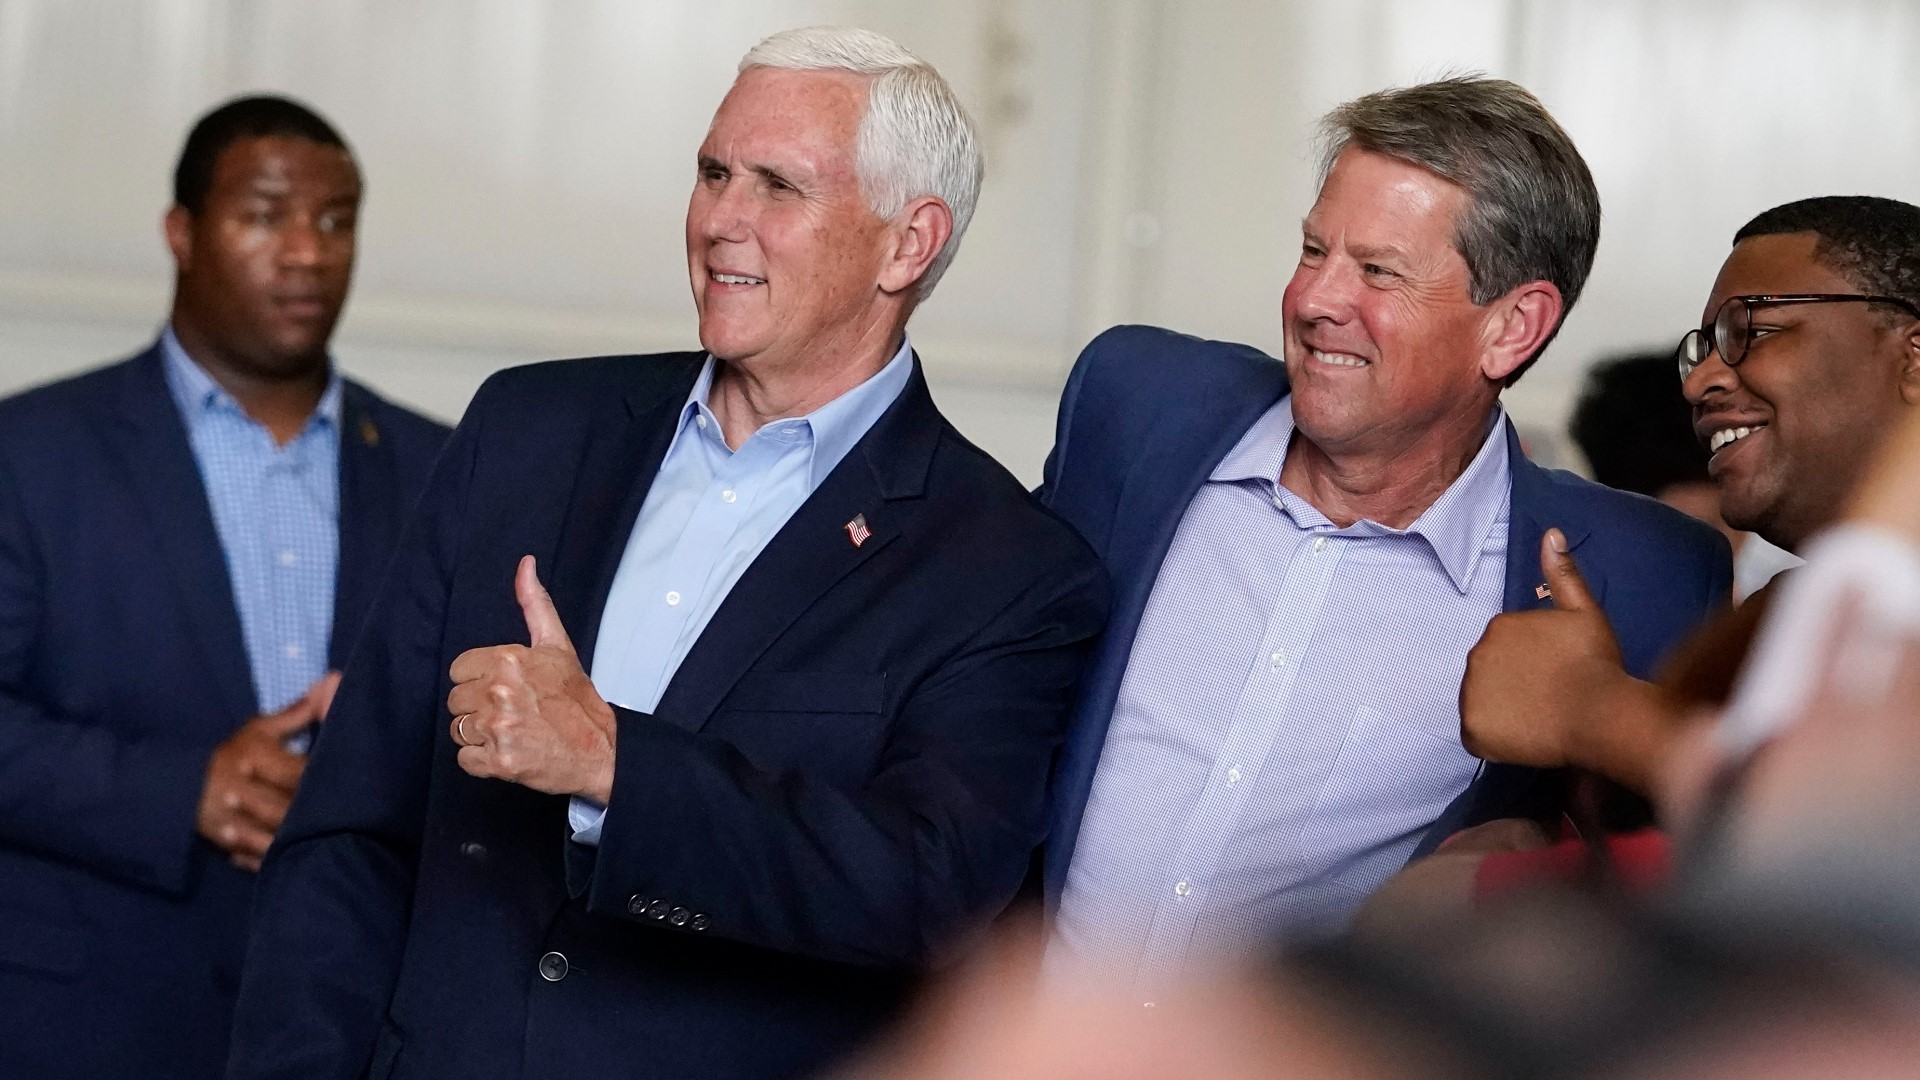 Former VP Mike Pence is expected to campaign with the Georgia governor on his bus tour in Cumming and Gainesville.